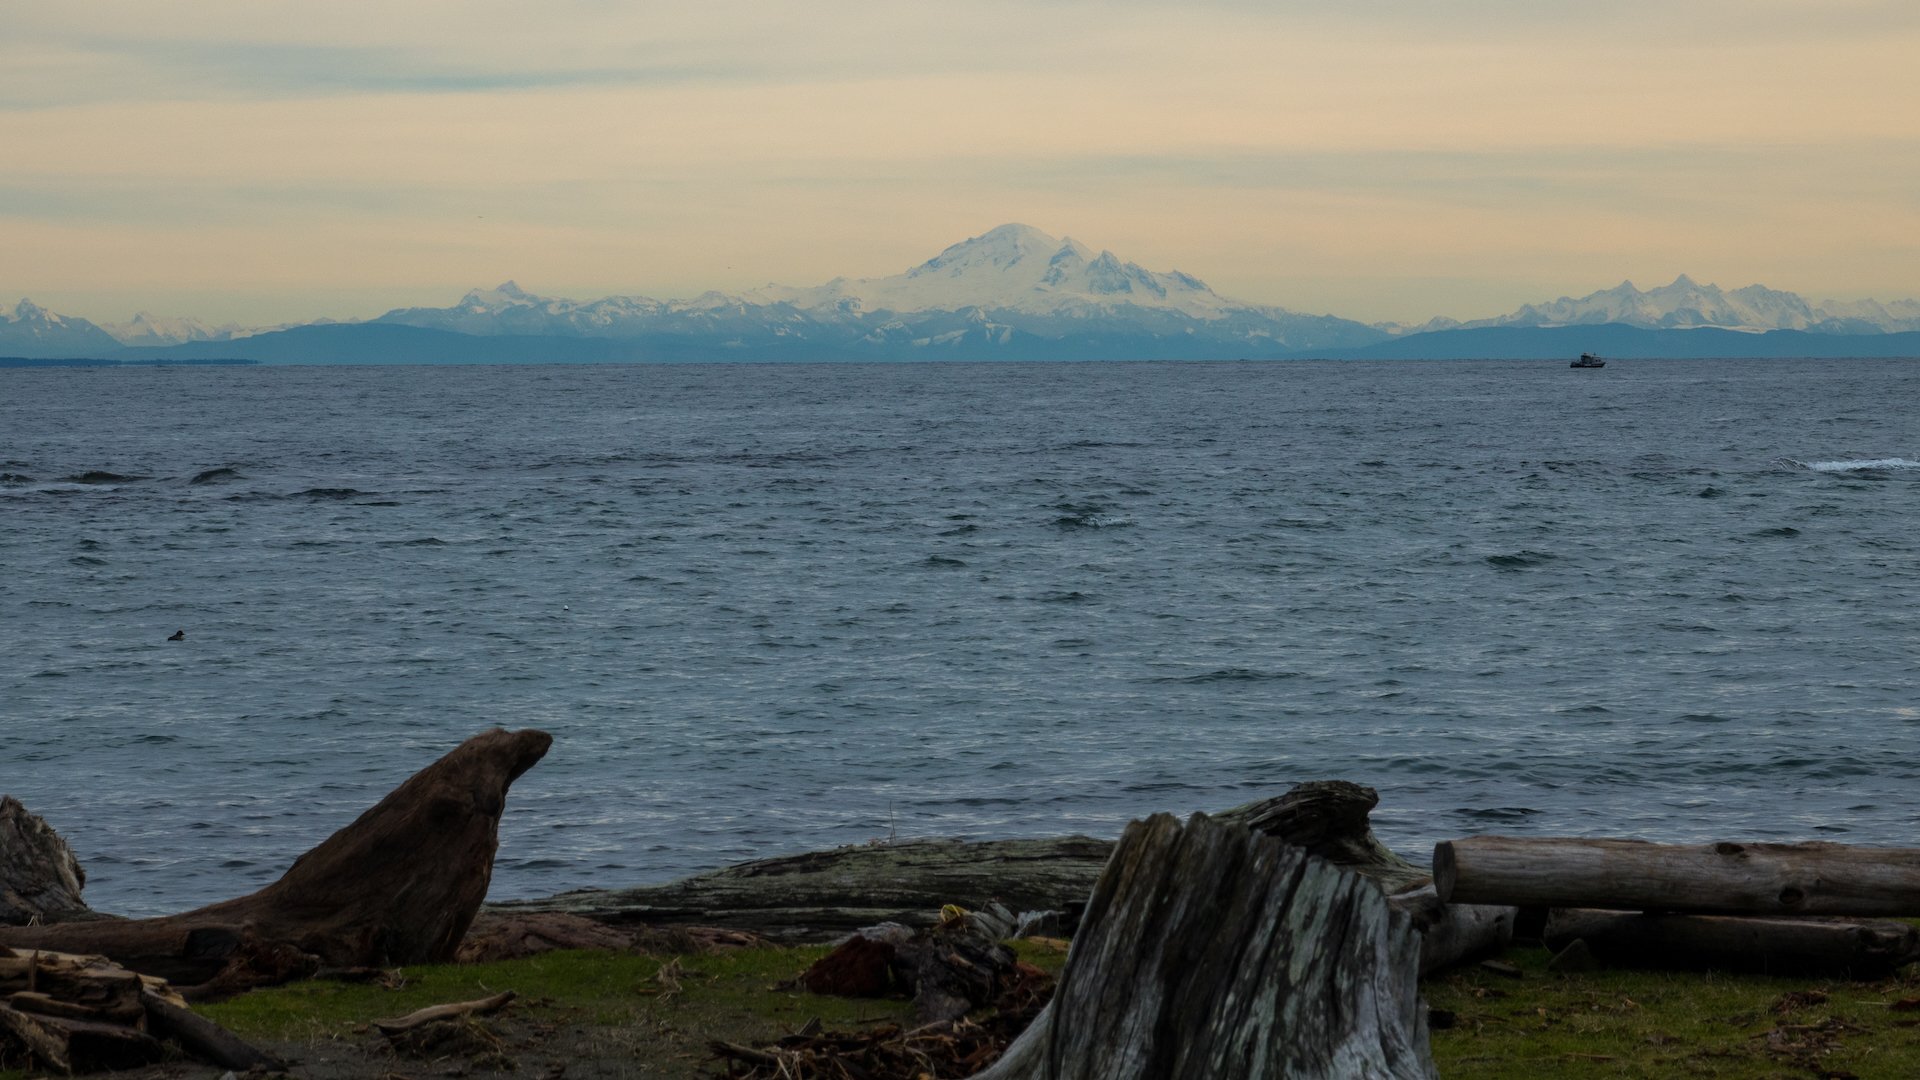  It was a nice clear day and you could easily see Mount Baker.  